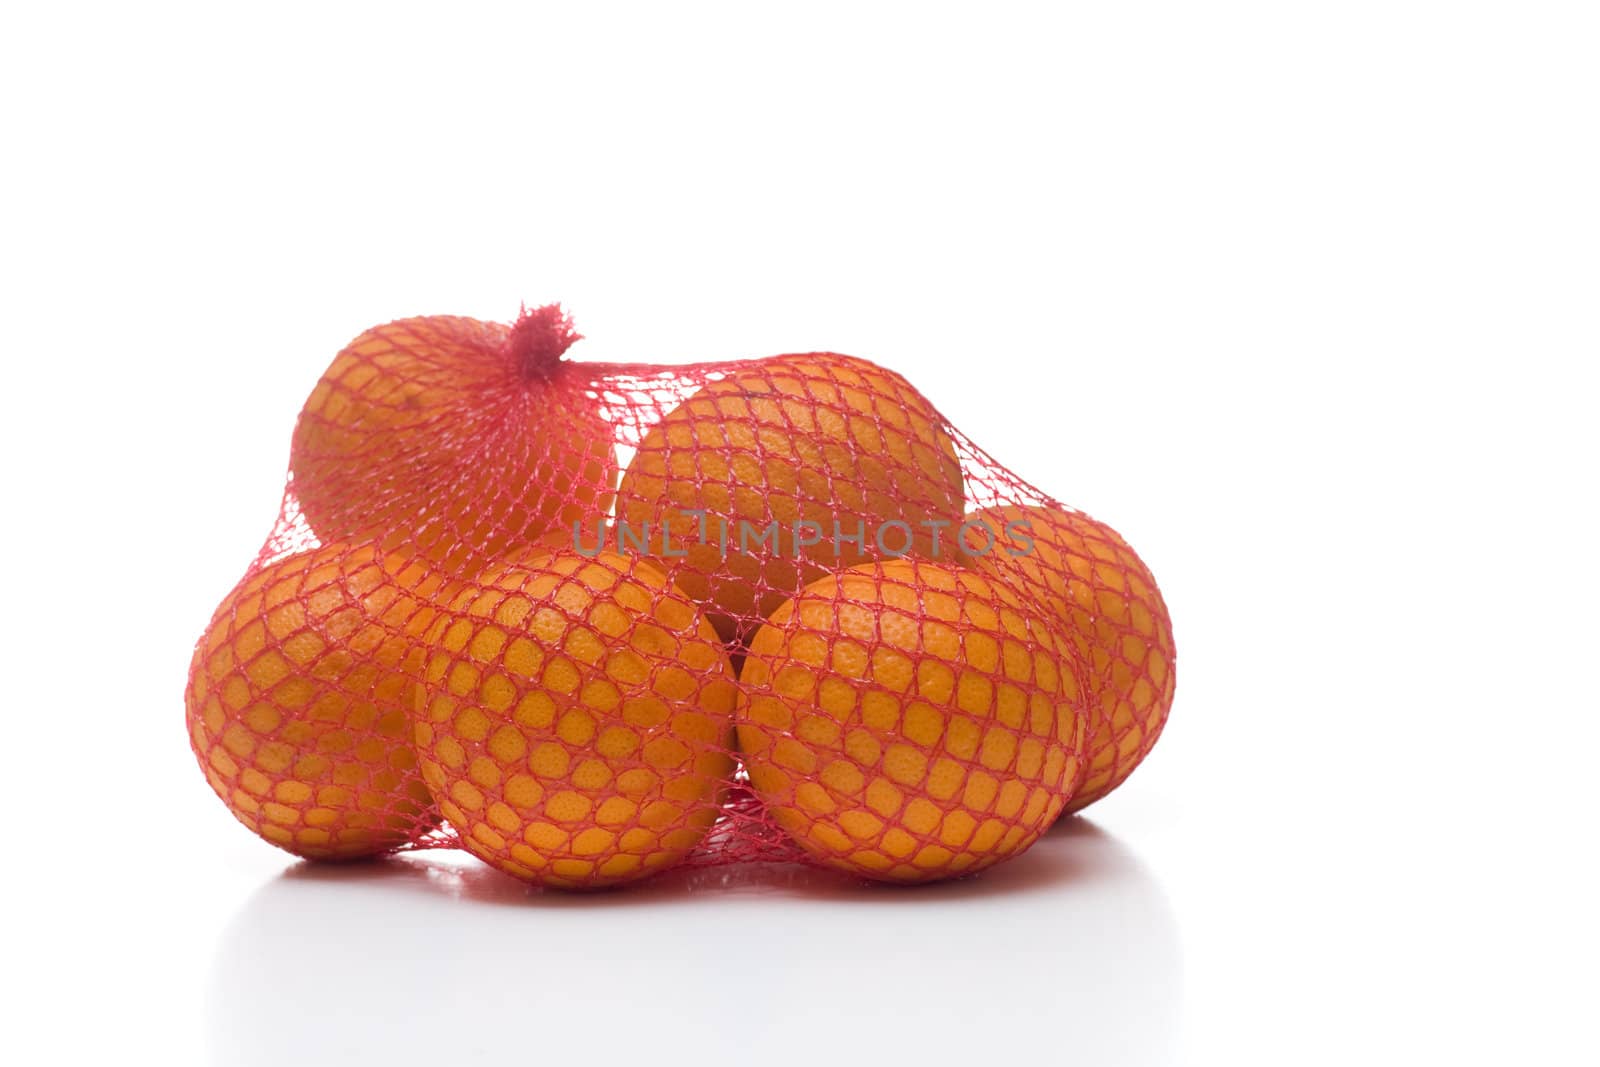 A bunch of oranges packaged in red netting, isolated on white.